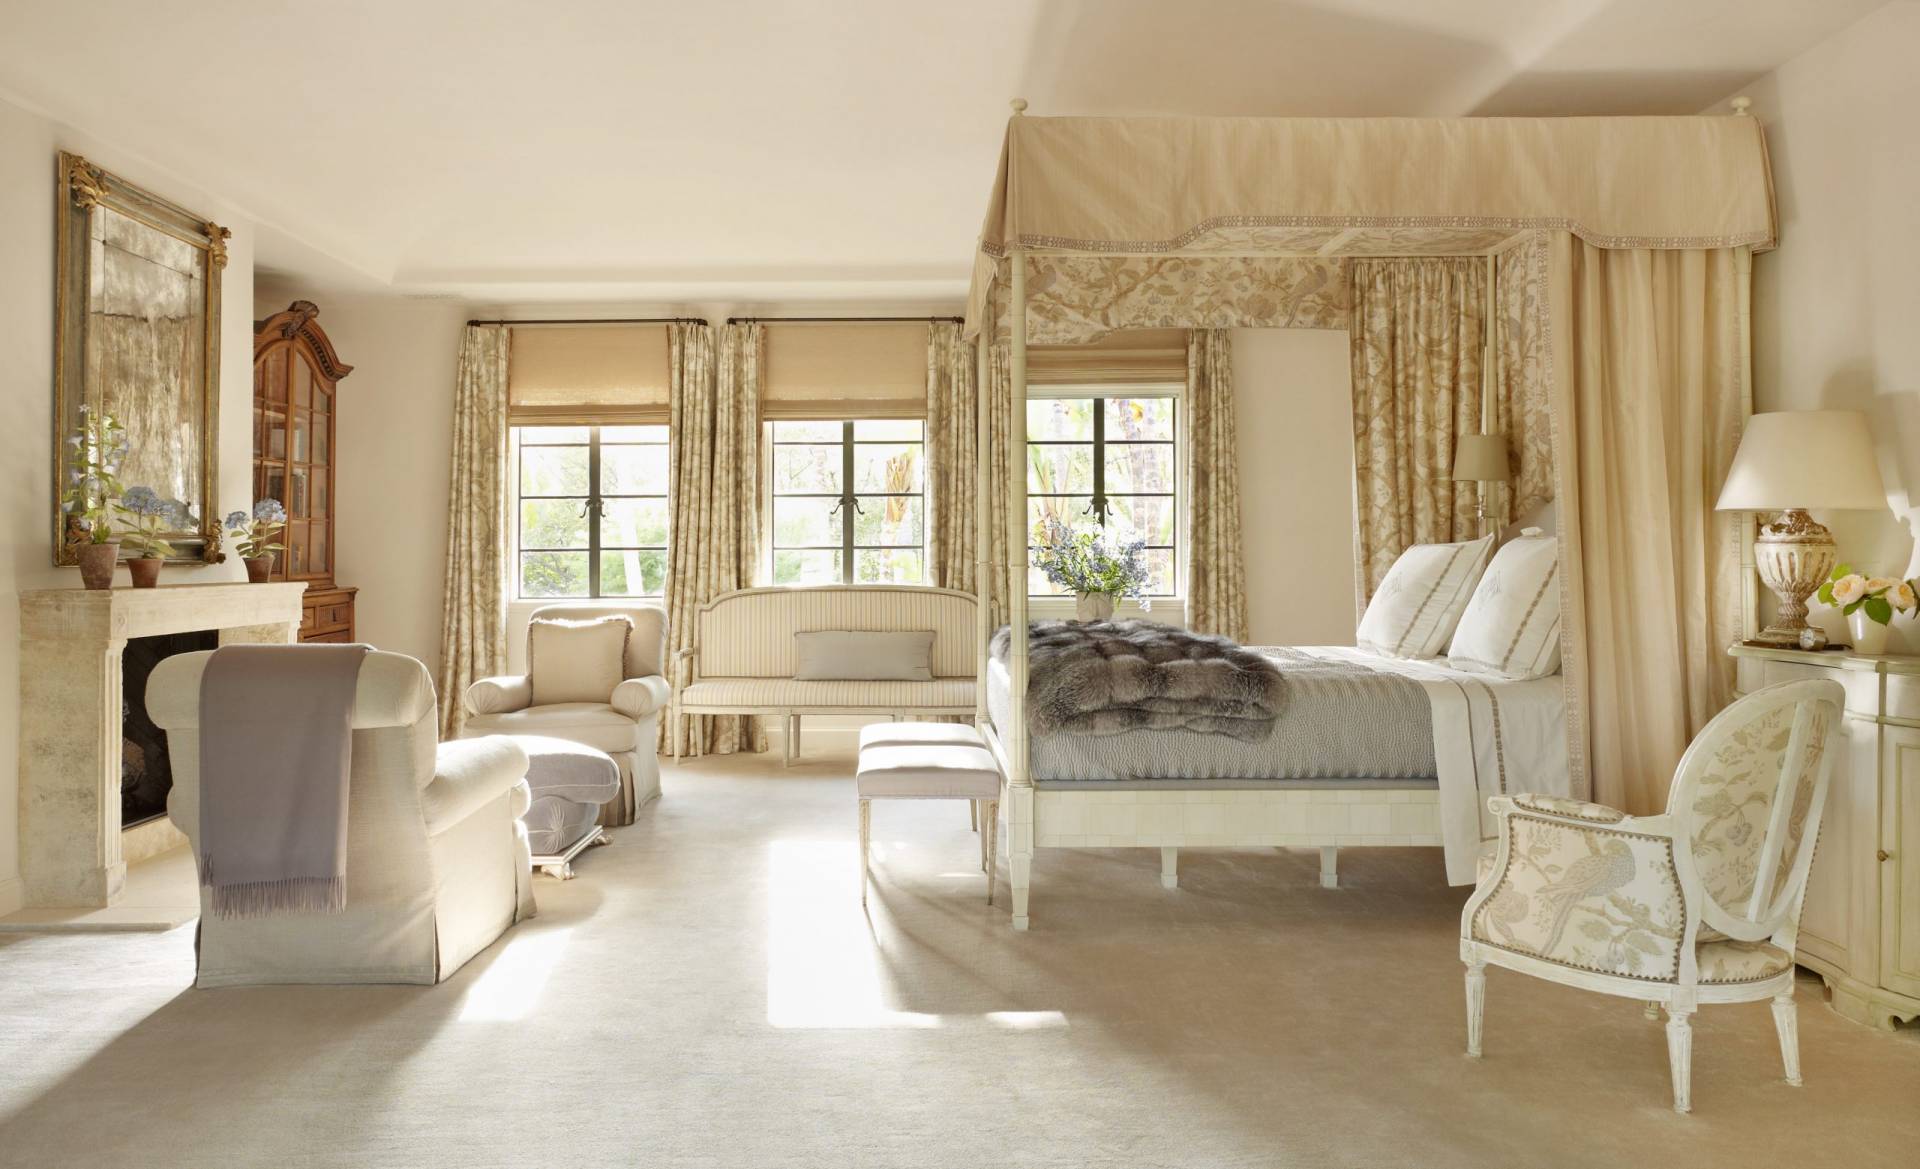 Shades of gold bedroom with bed canopy, pleated drapery, roman shades, and upholstery